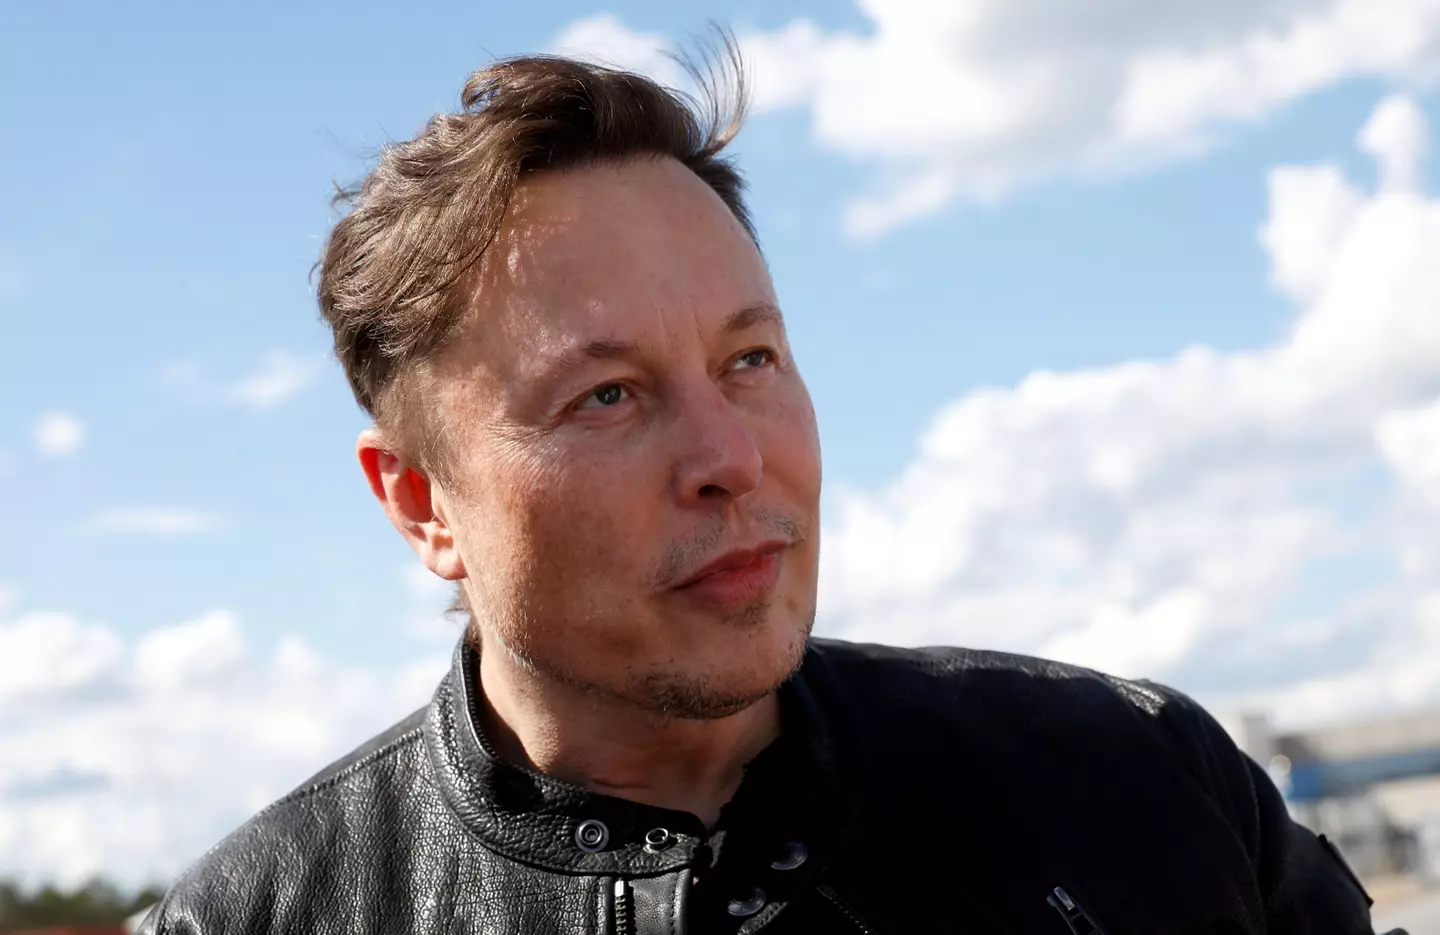 Musk compared the work ethic of Americans to their Chinese counterparts.